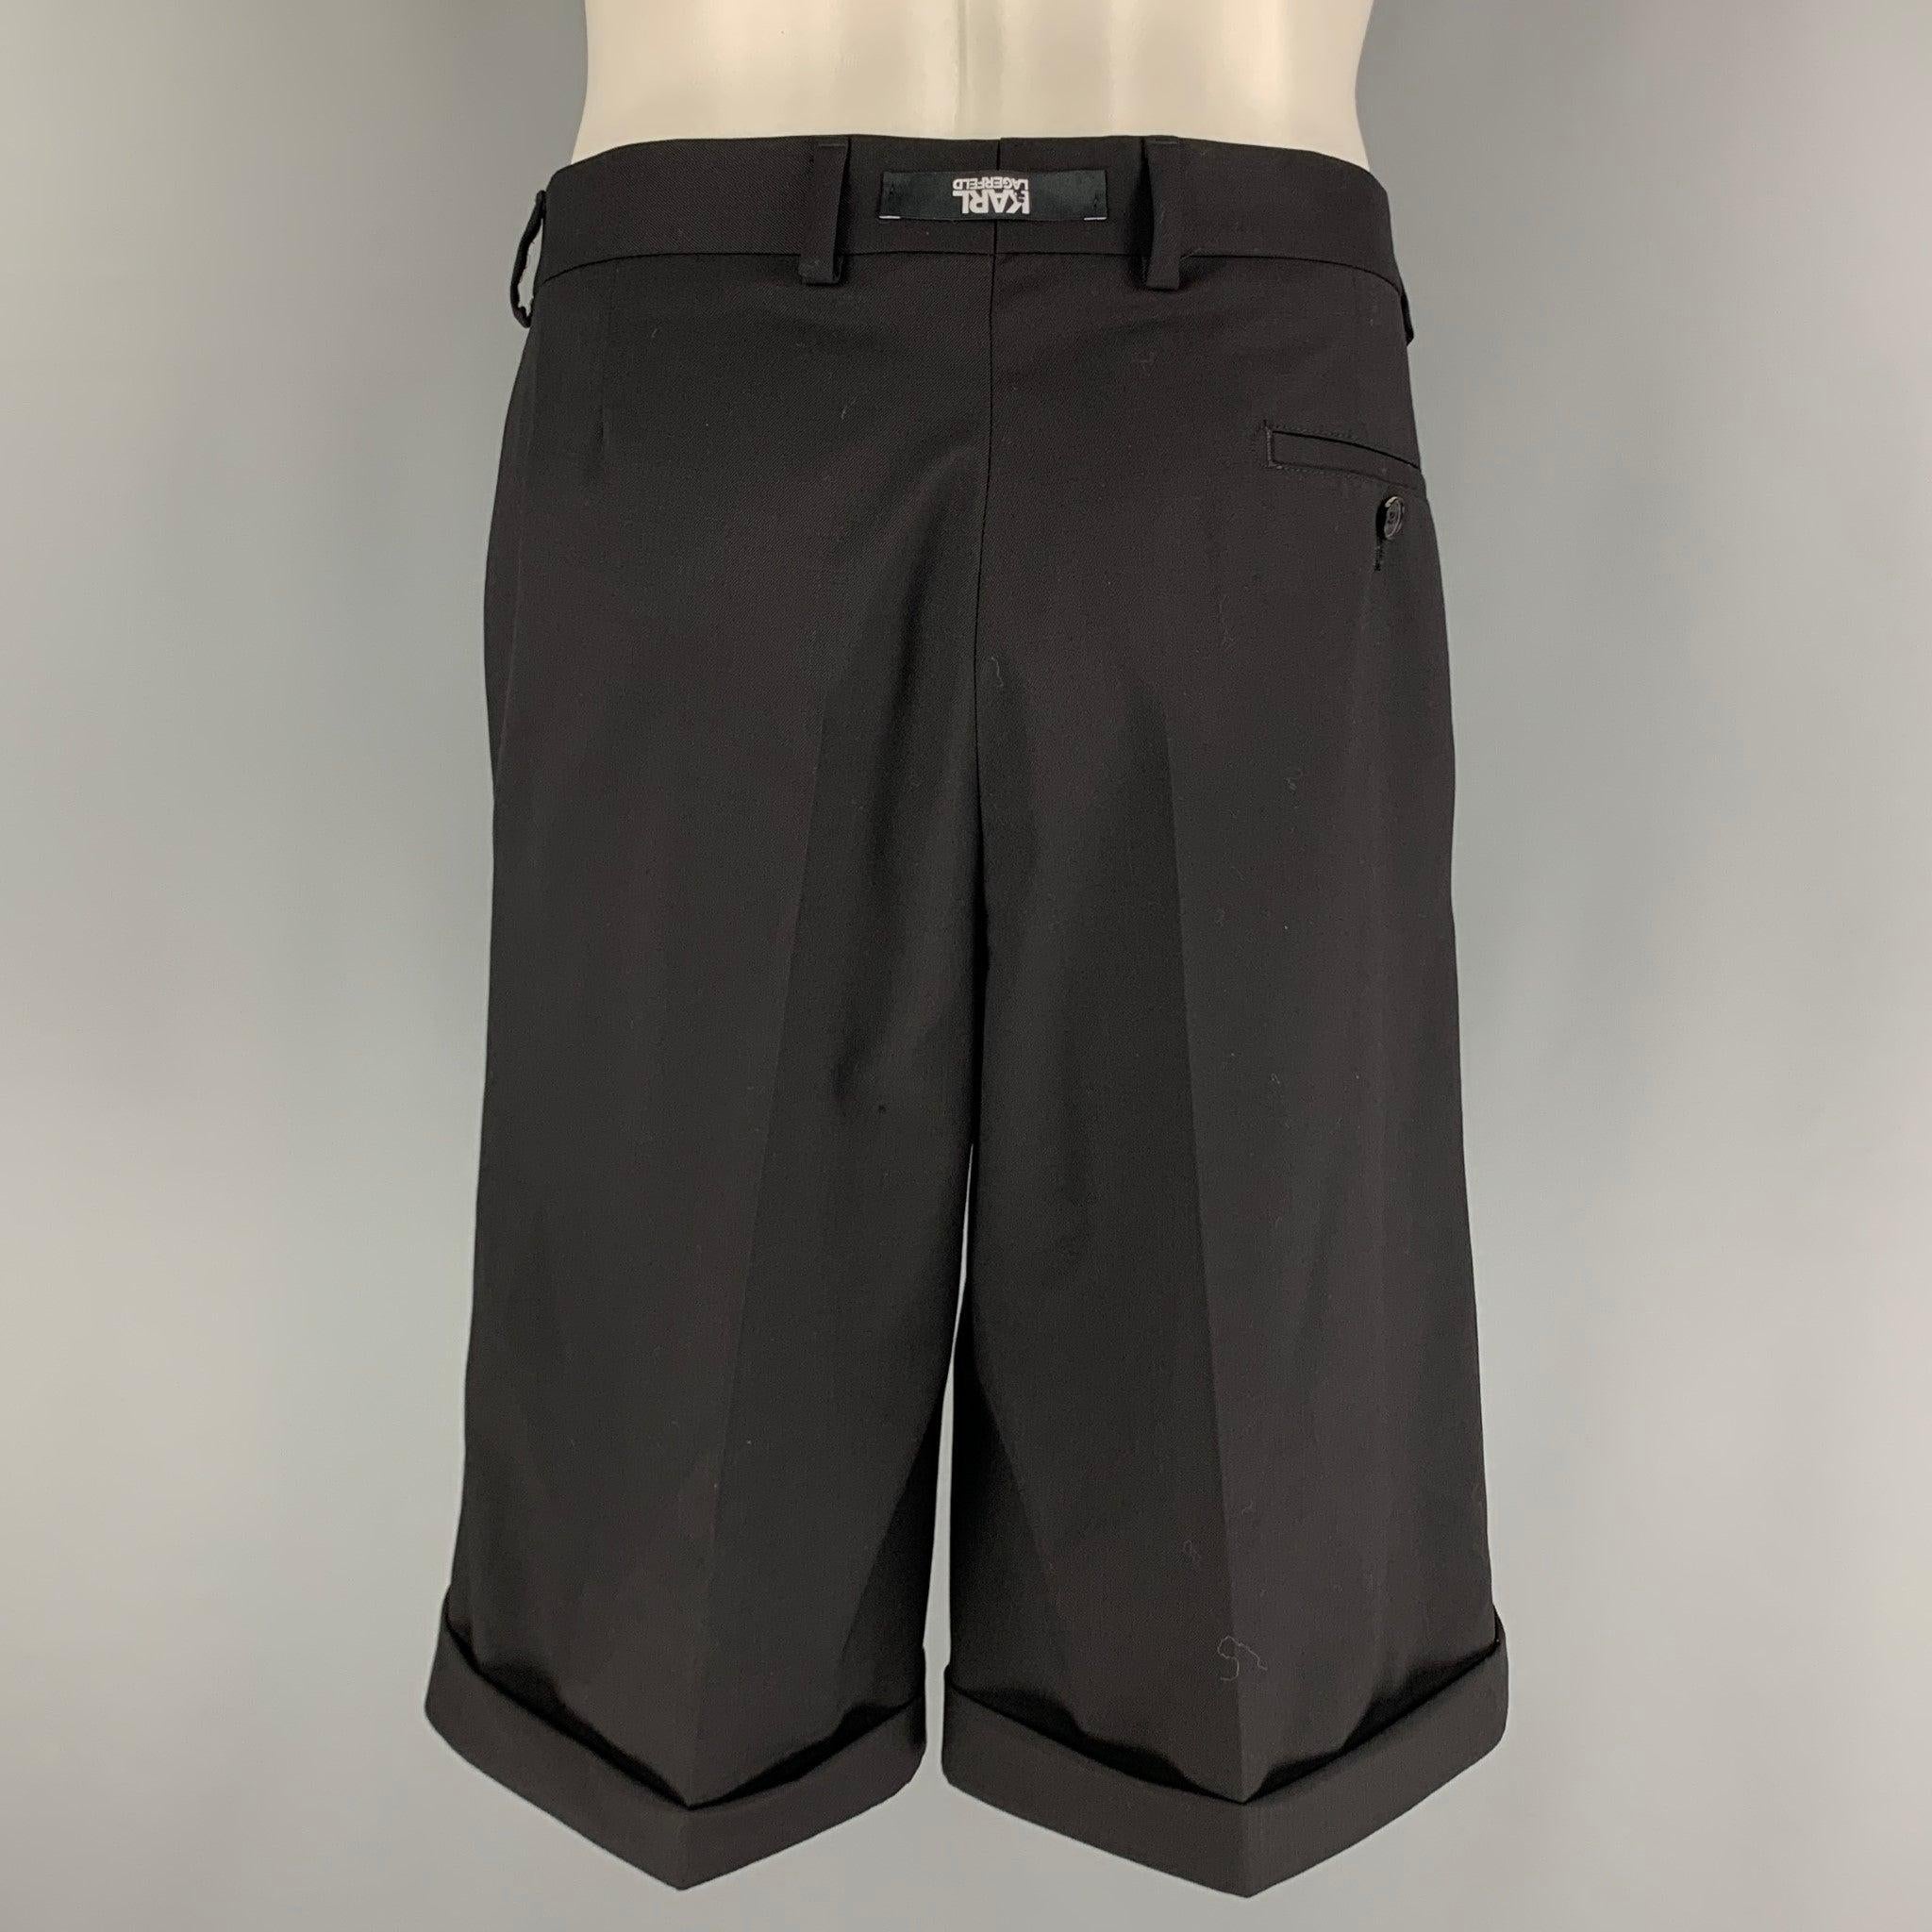 KARL LAGERFELD Size 36 Black Virgin wool elastane Flat Front Shorts In Excellent Condition For Sale In San Francisco, CA